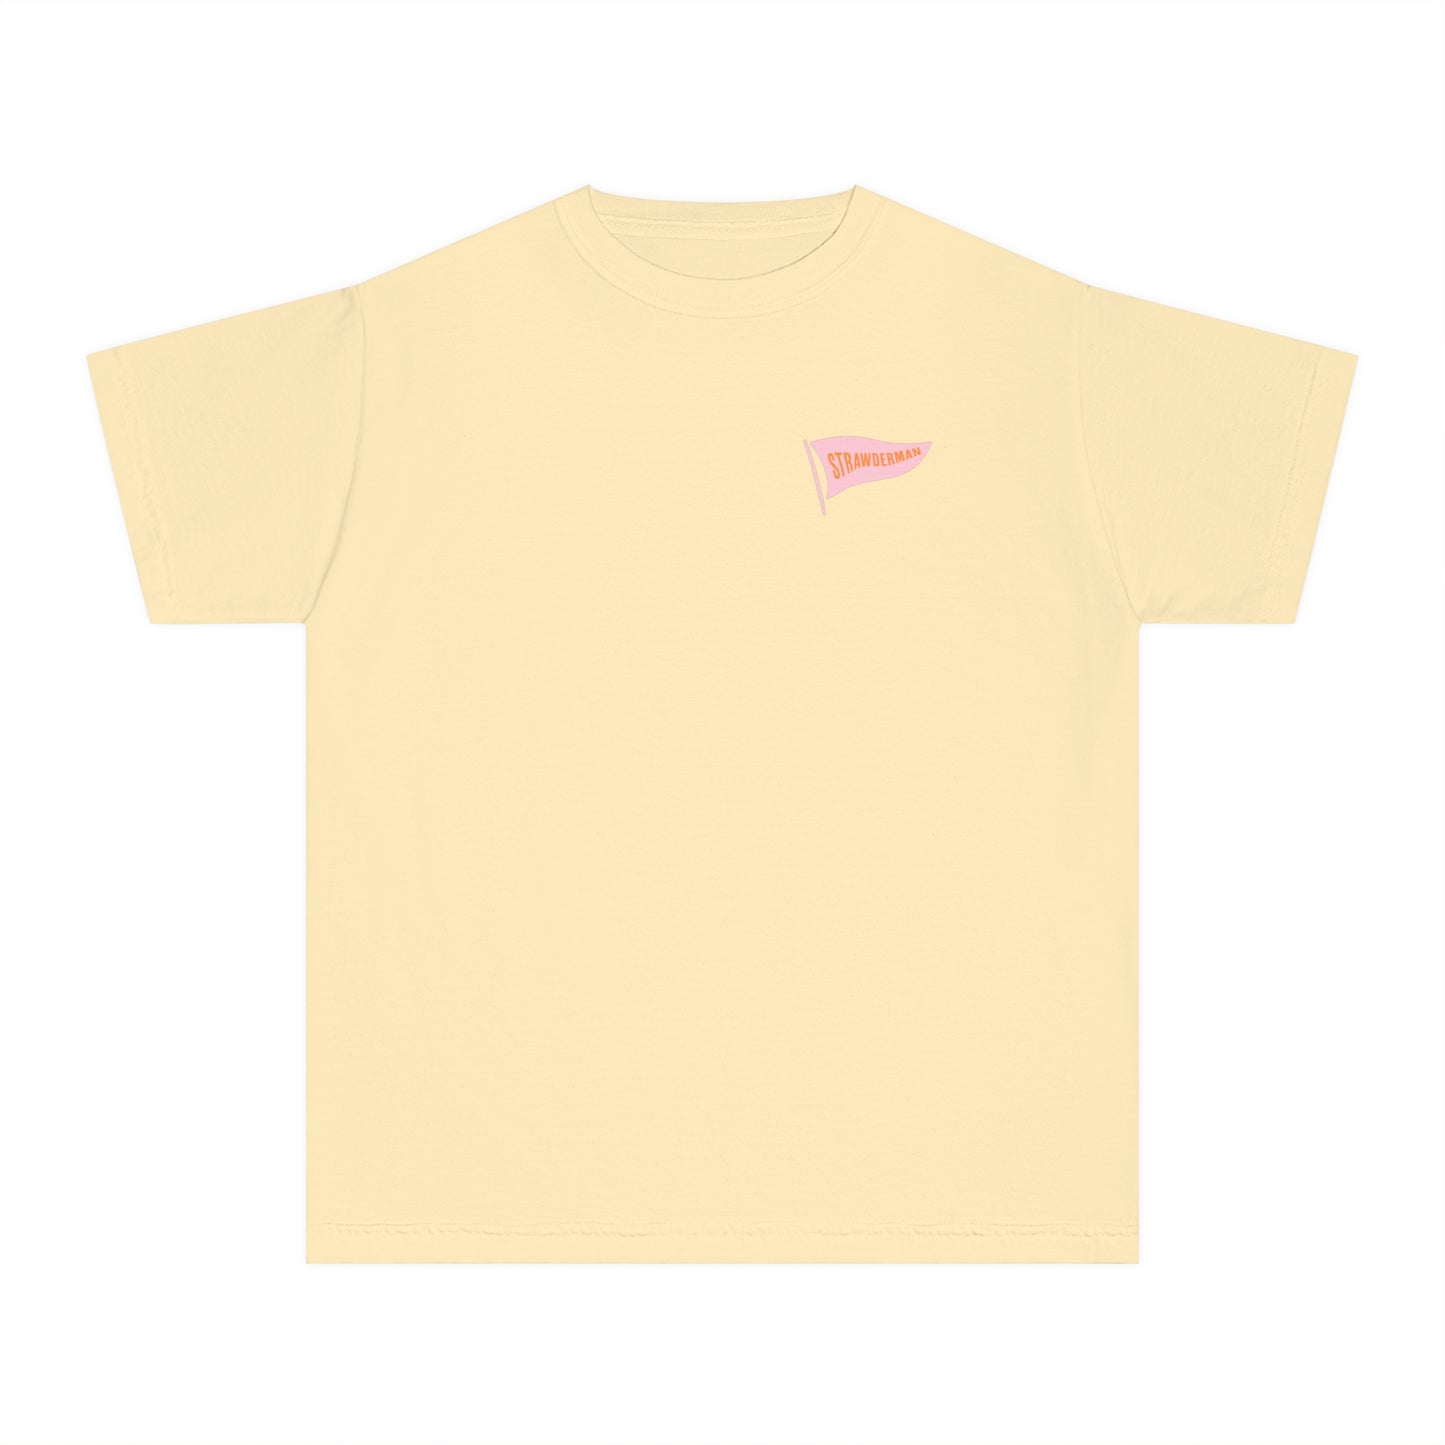 Pennant Youth Midweight Tee